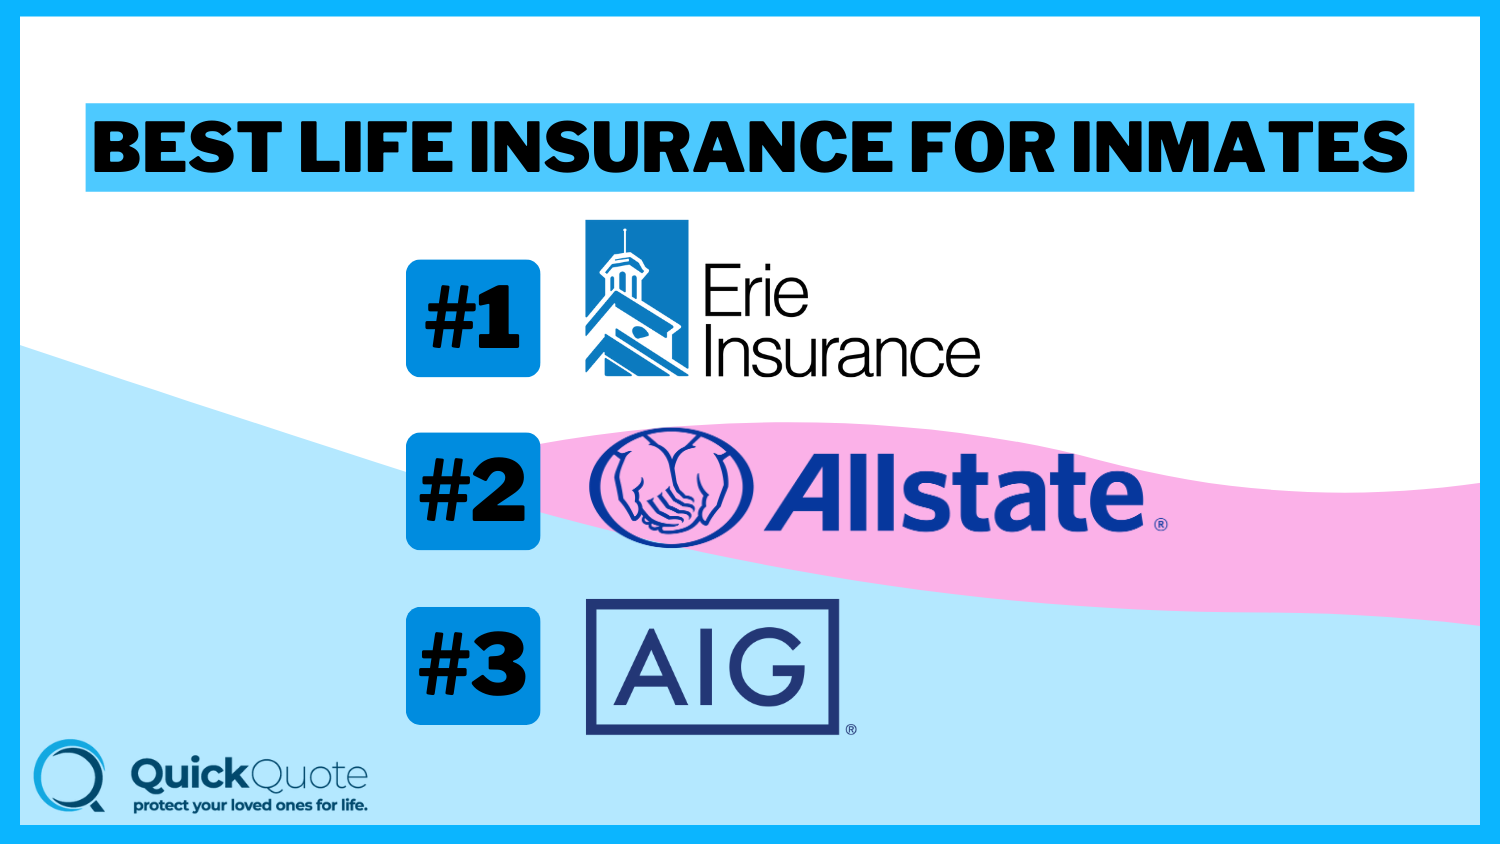 Best Life Insurance for Inmates: Erie, Allstate, and AIG